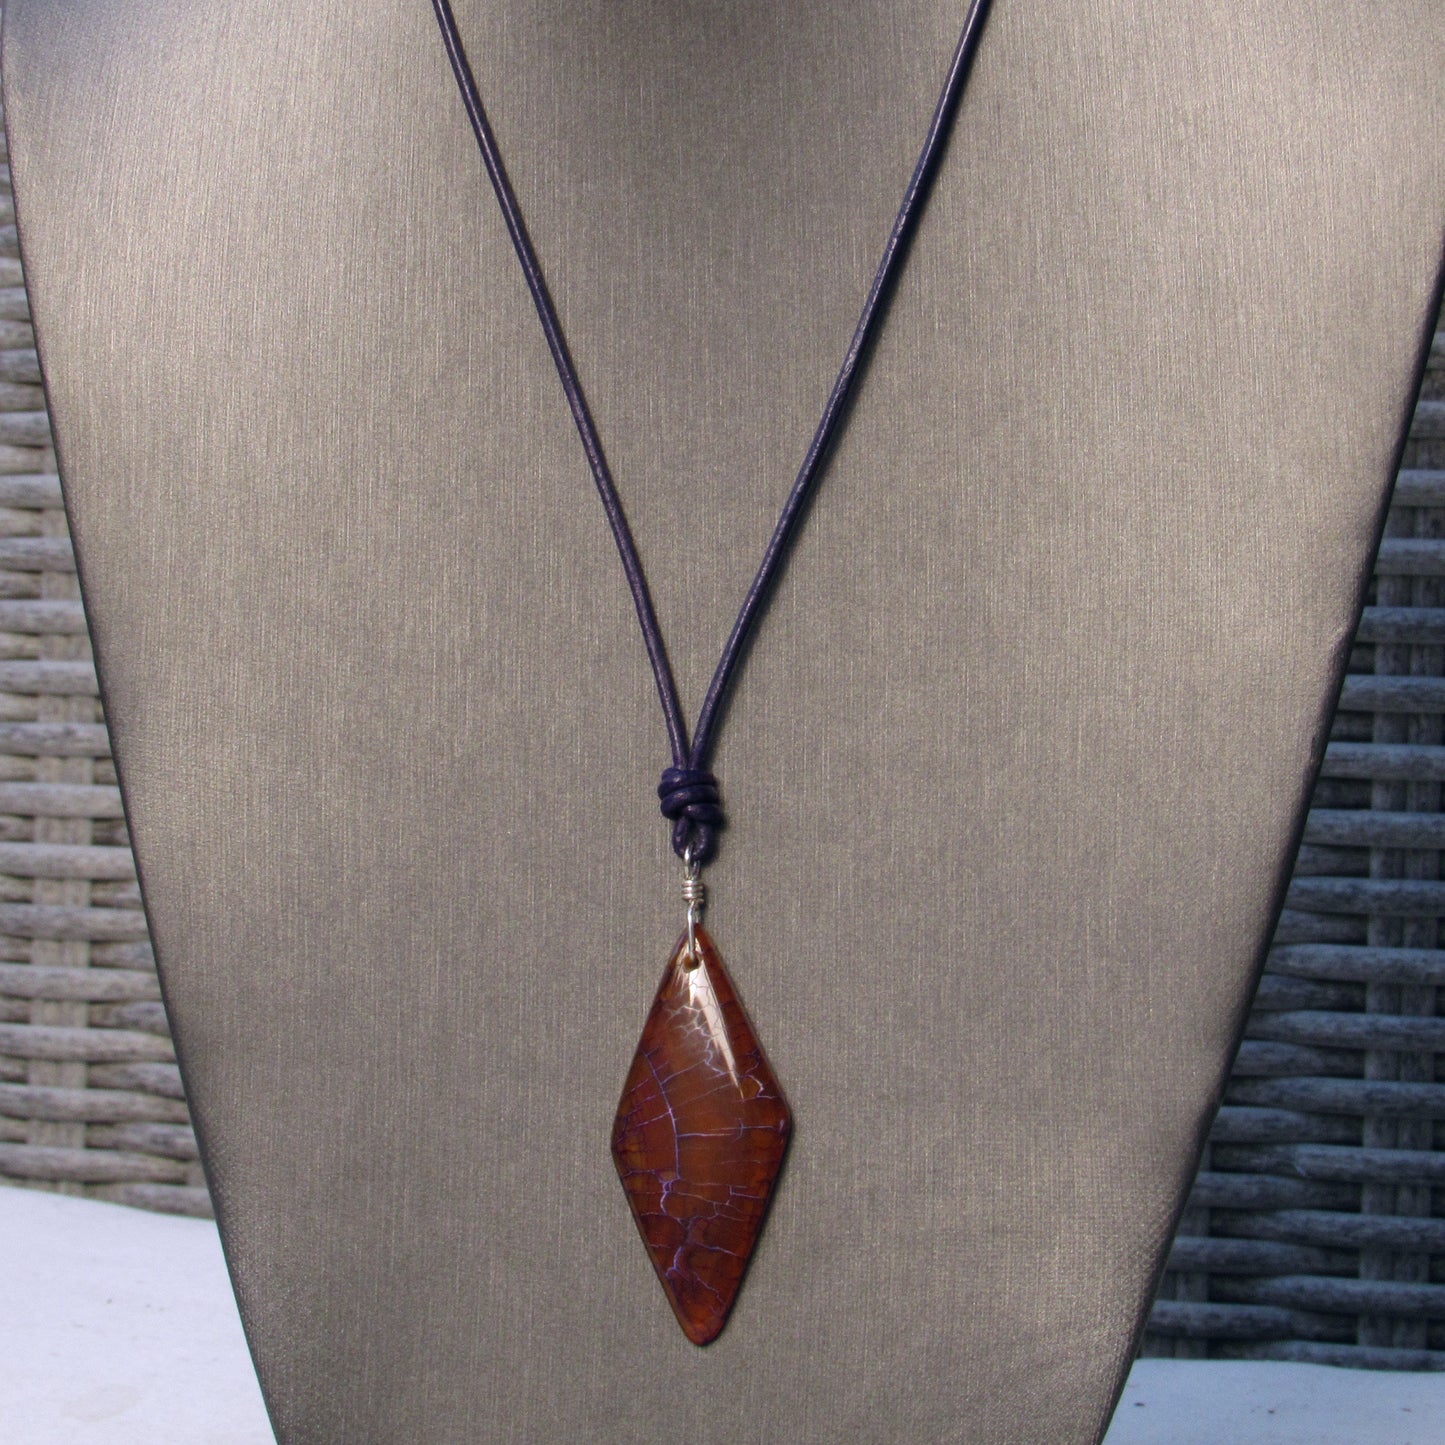 Dragon’s Vein Agate gemstone, Sterling Silver, and Leather